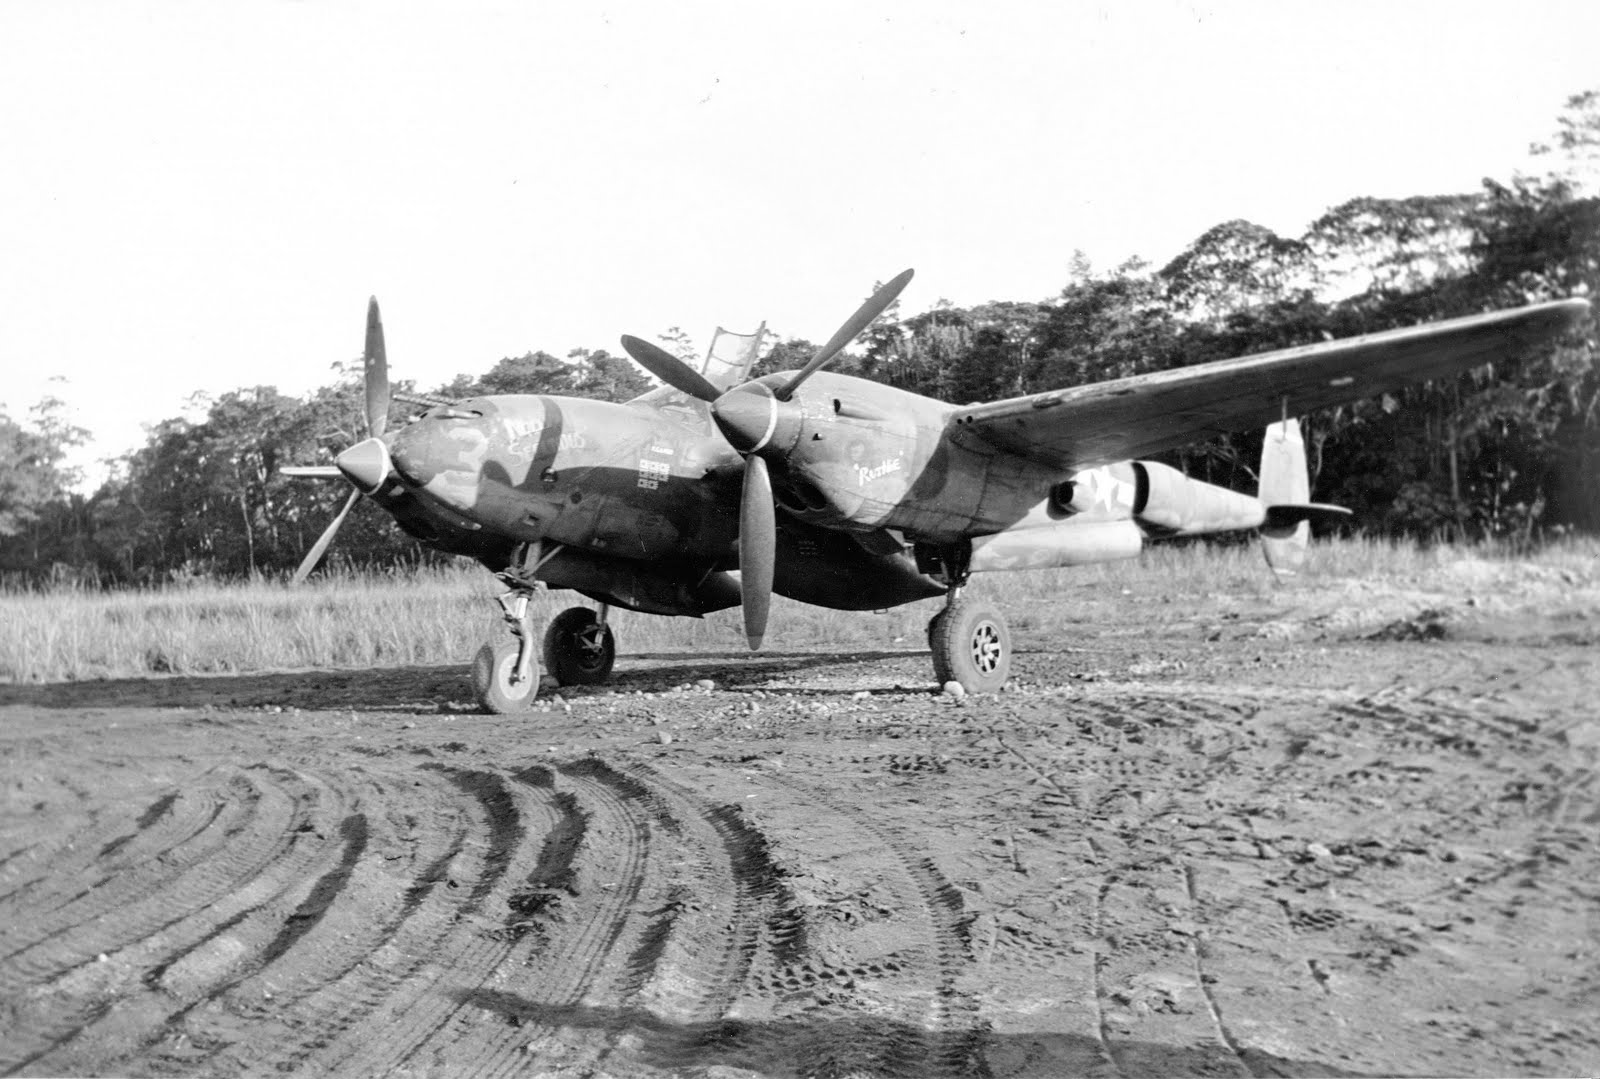 A P-38 Lightning with the 80th Fighter Squadron, the “Headhunters,” at rest at Dobodura, New Guinea, Dec 1943 – Feb 1944. Note the improvised wheel chocks.